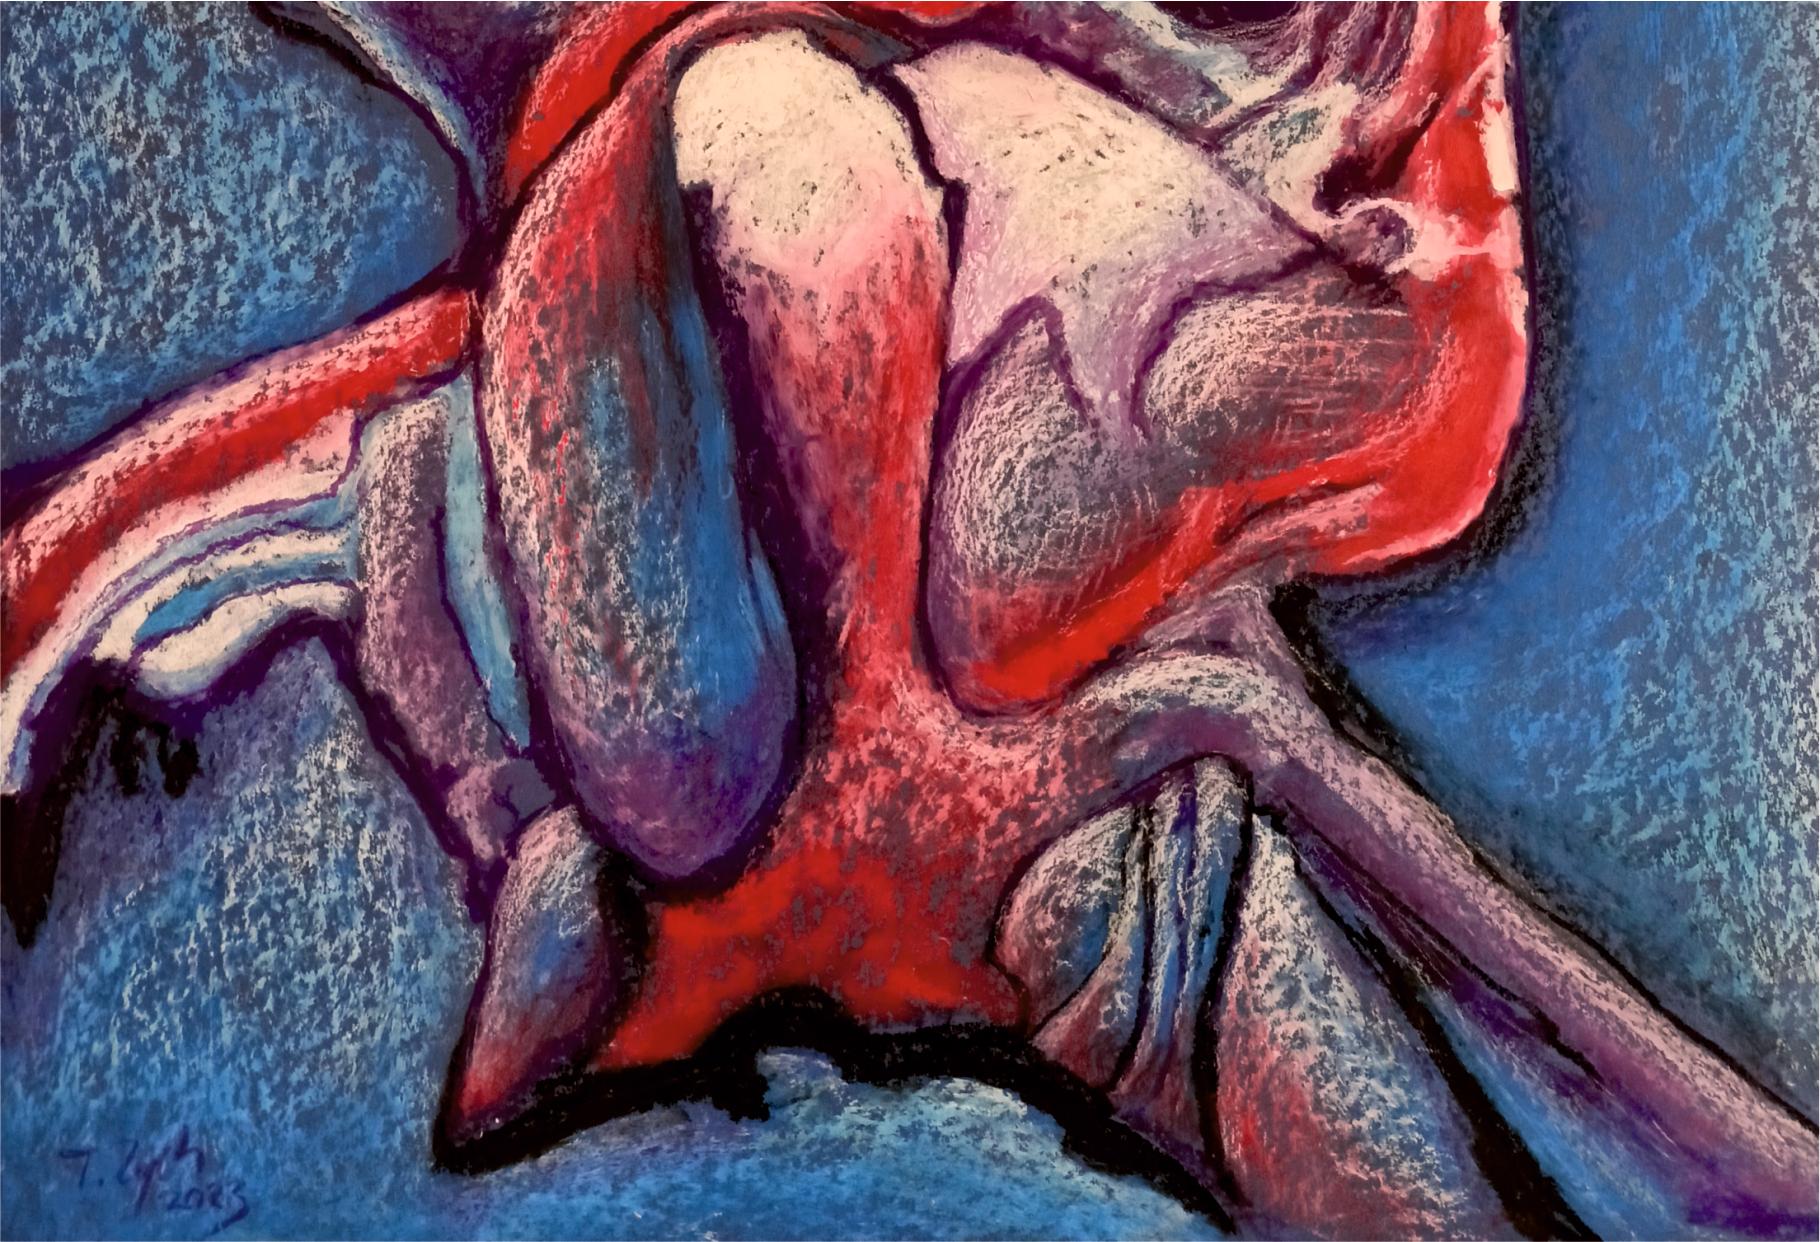 Oil pastel on cardboard. The paintings are characterized by attractive colors and energy flowing from them. Catalog Number P0148.
Figurative image. Framed in a beautiful red wooden frame. Ready to hang. Signed on the front.
The painting is